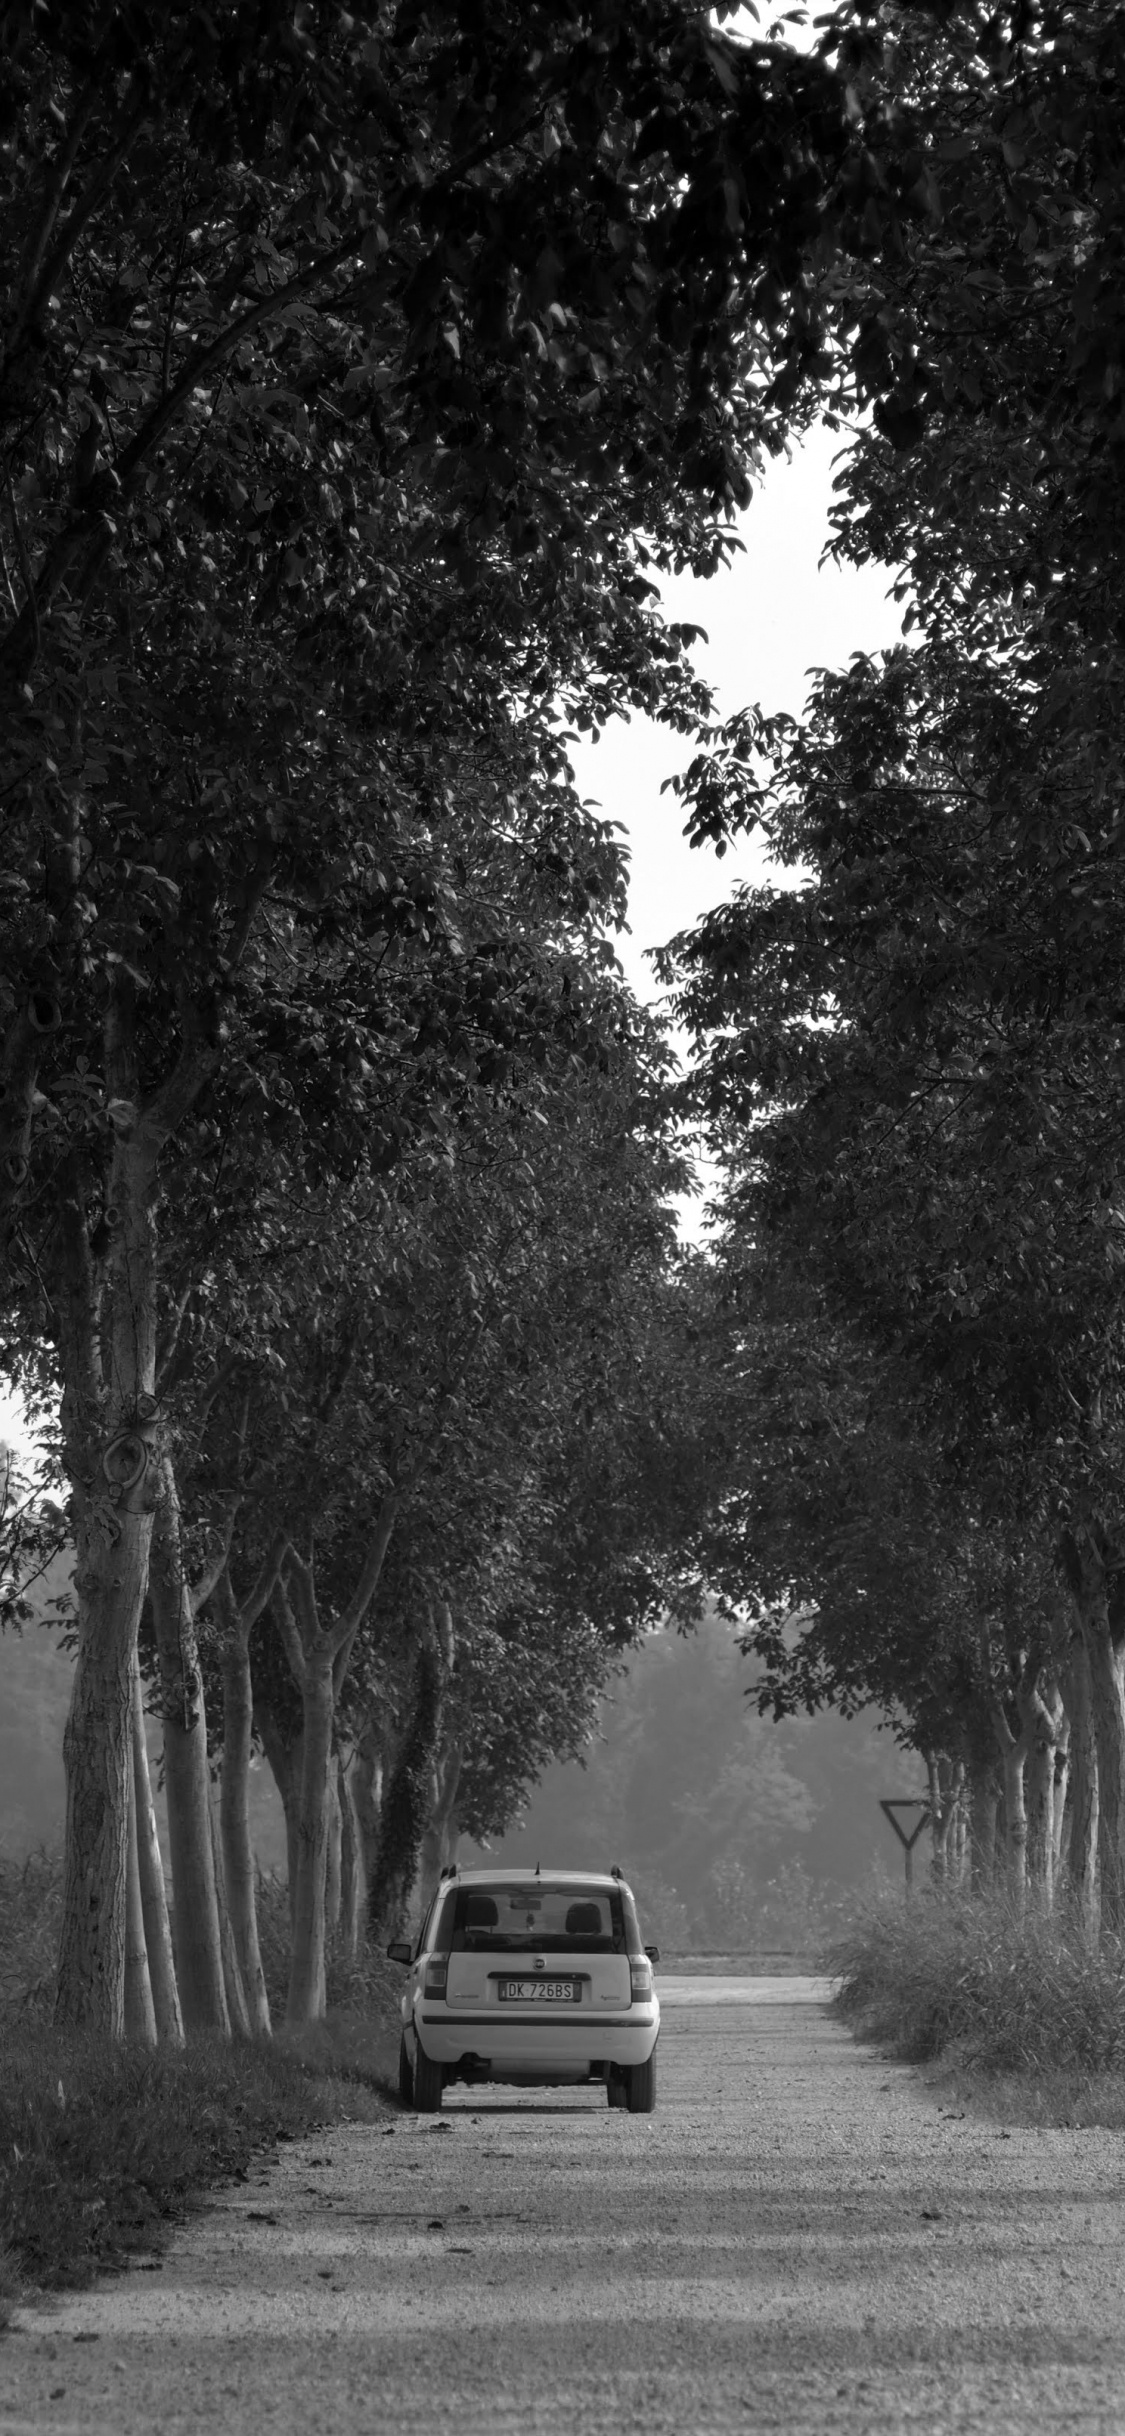 Grayscale Photo of Car on Road Between Trees. Wallpaper in 1125x2436 Resolution